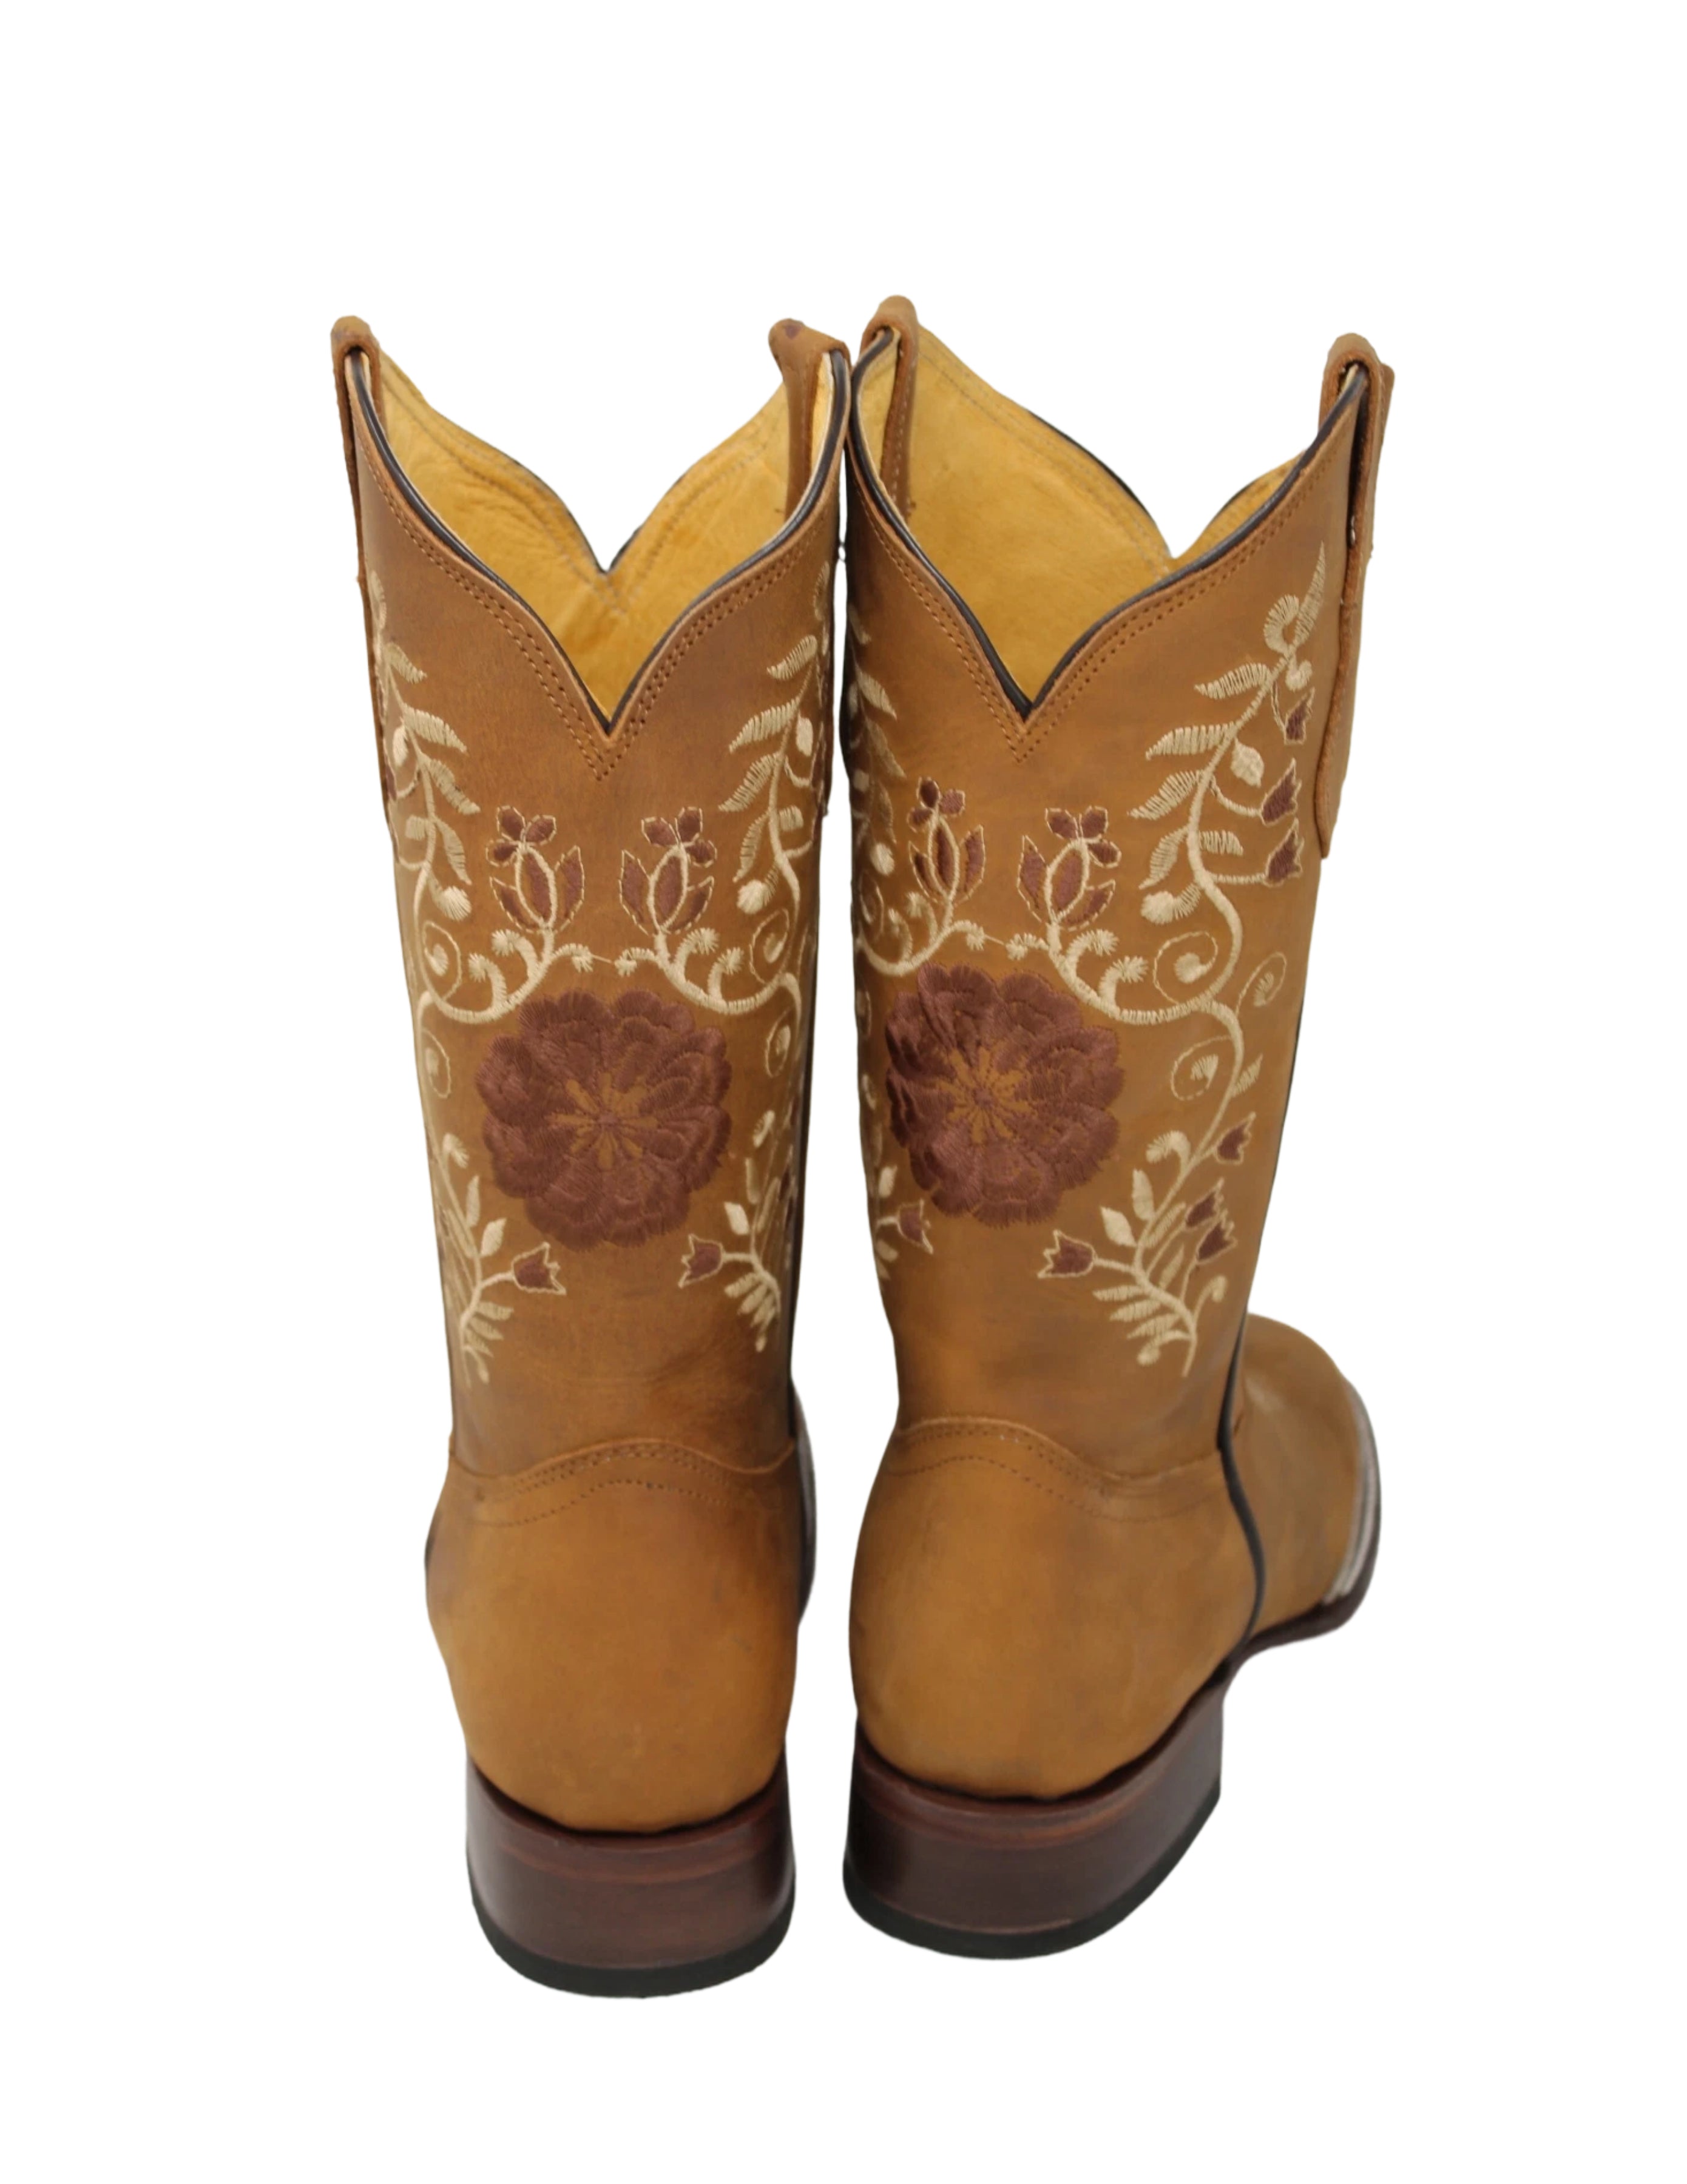 Katie Embroidery Cowgirl Boots (2 colors)